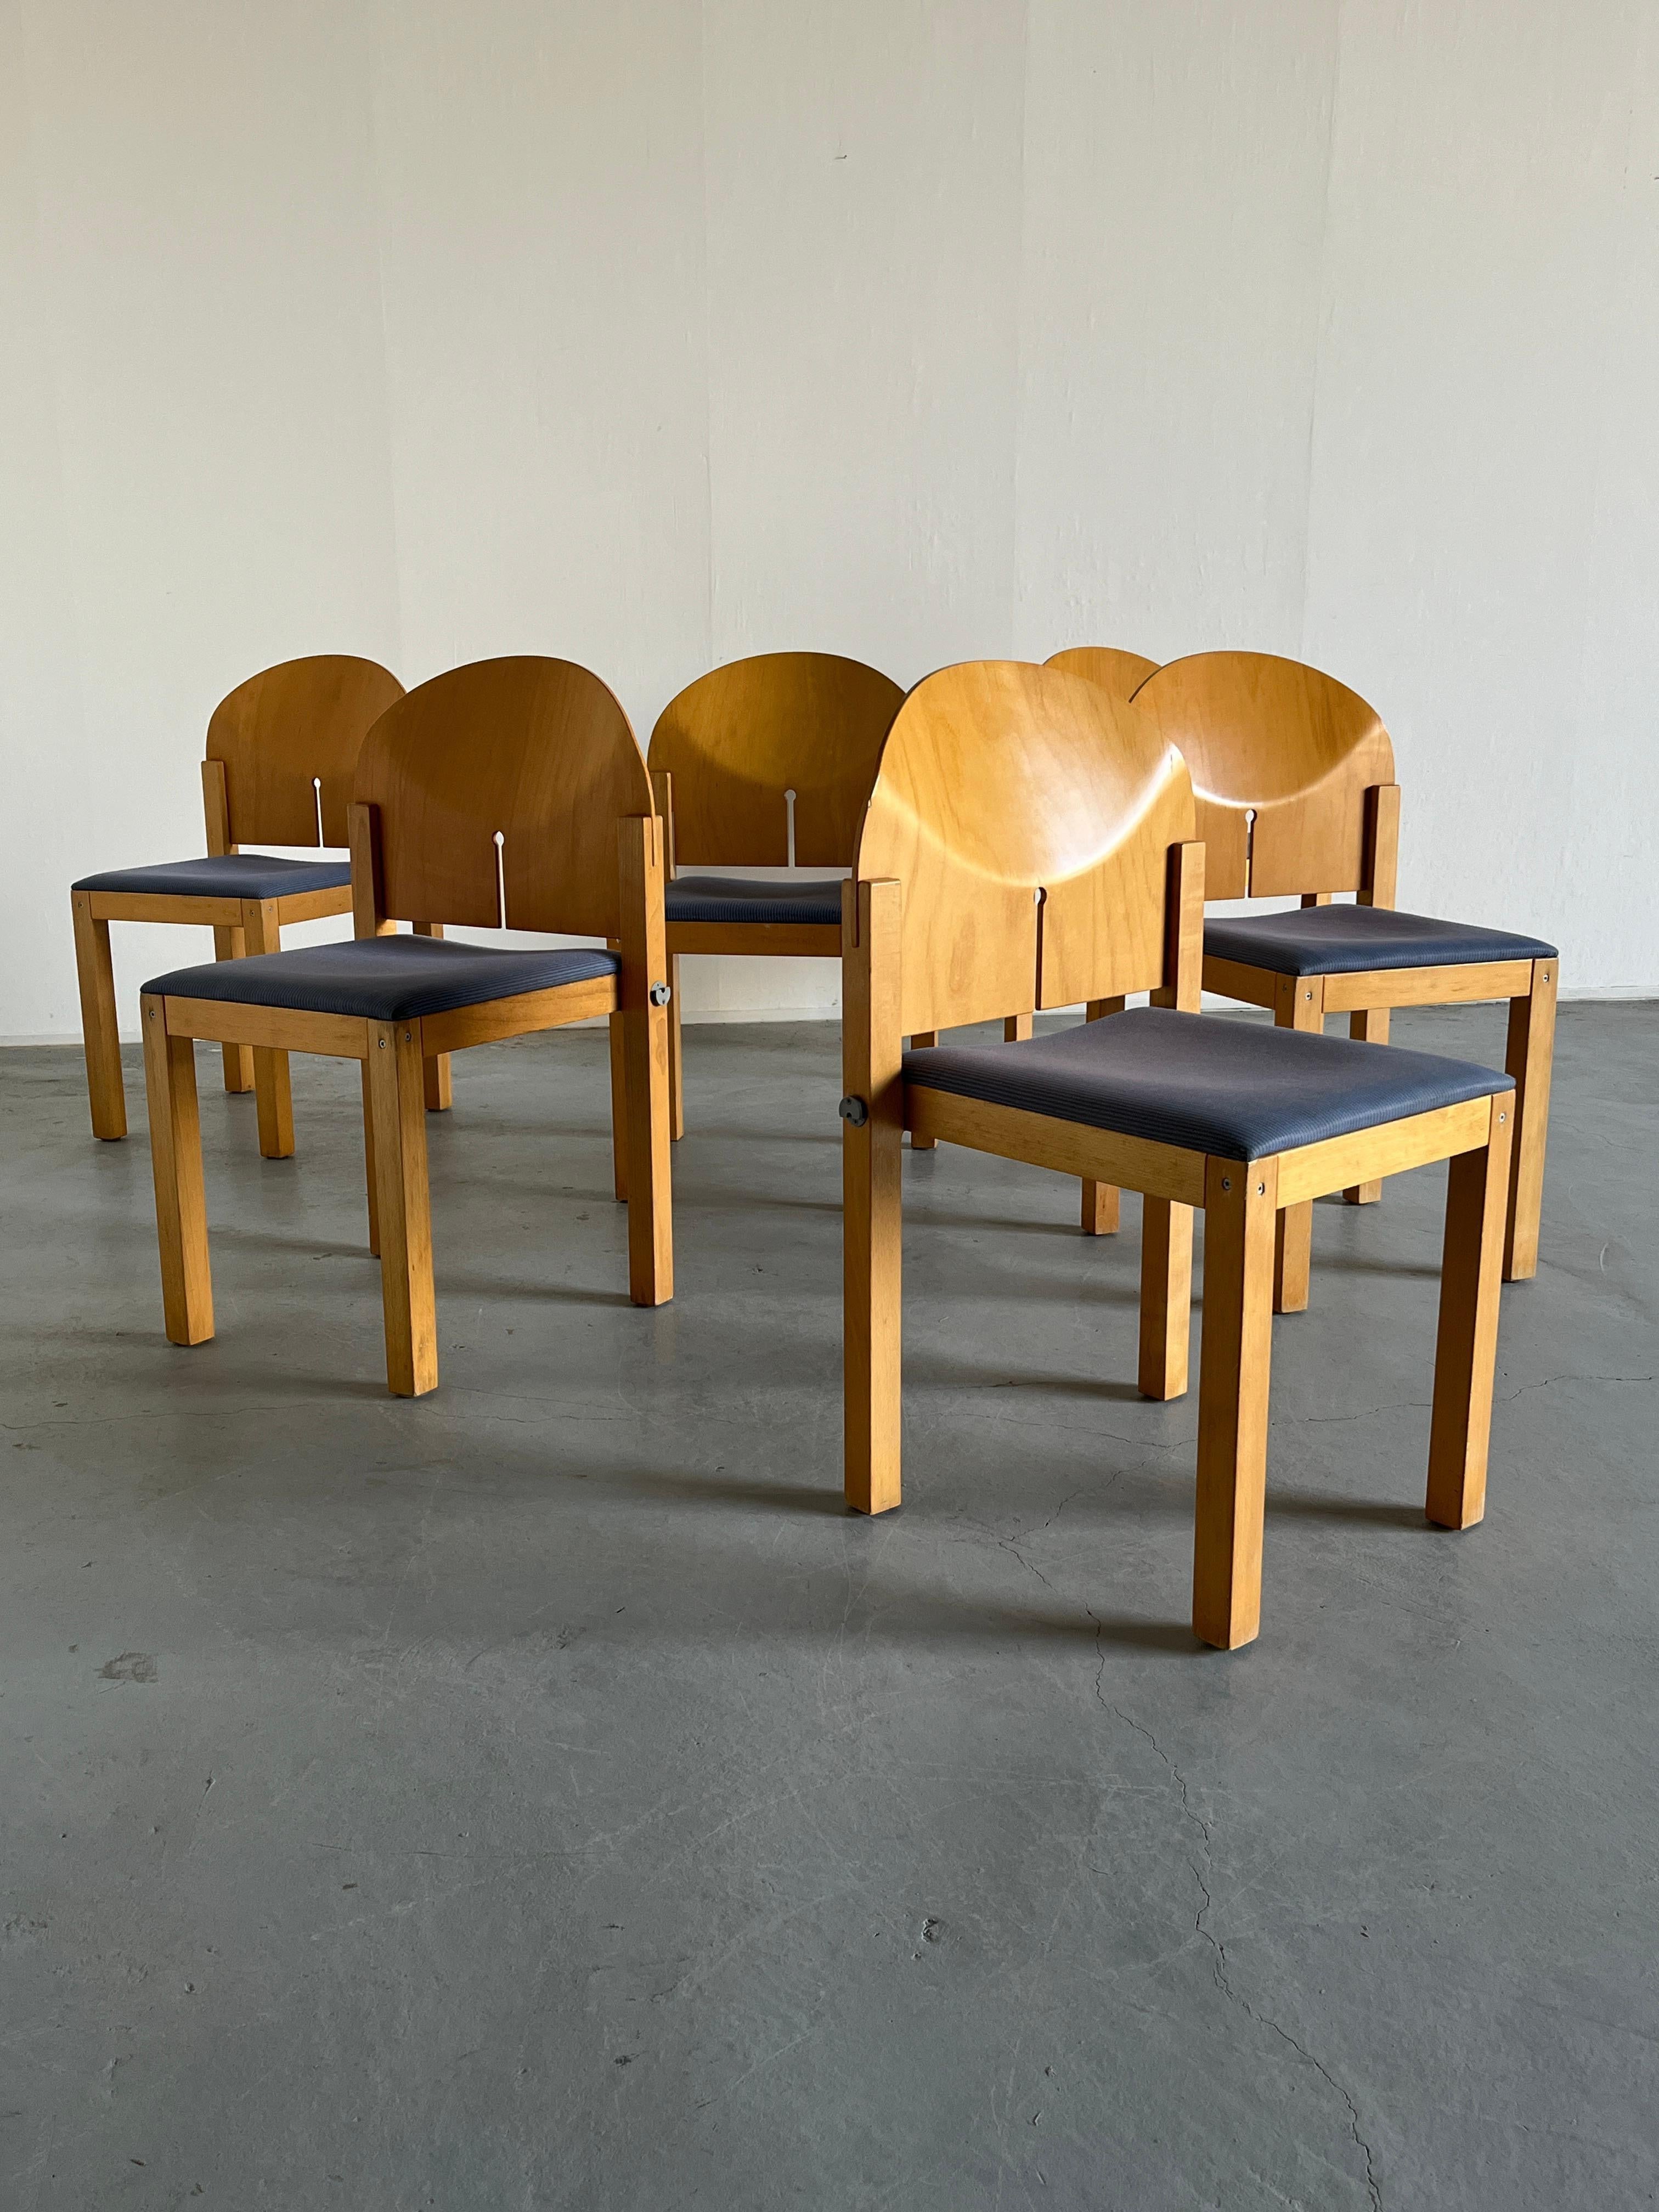 Late 20th Century 1 of 6 Postmodern Wooden Stackable Dining Chairs by Arno Votteler, 80s Germany For Sale